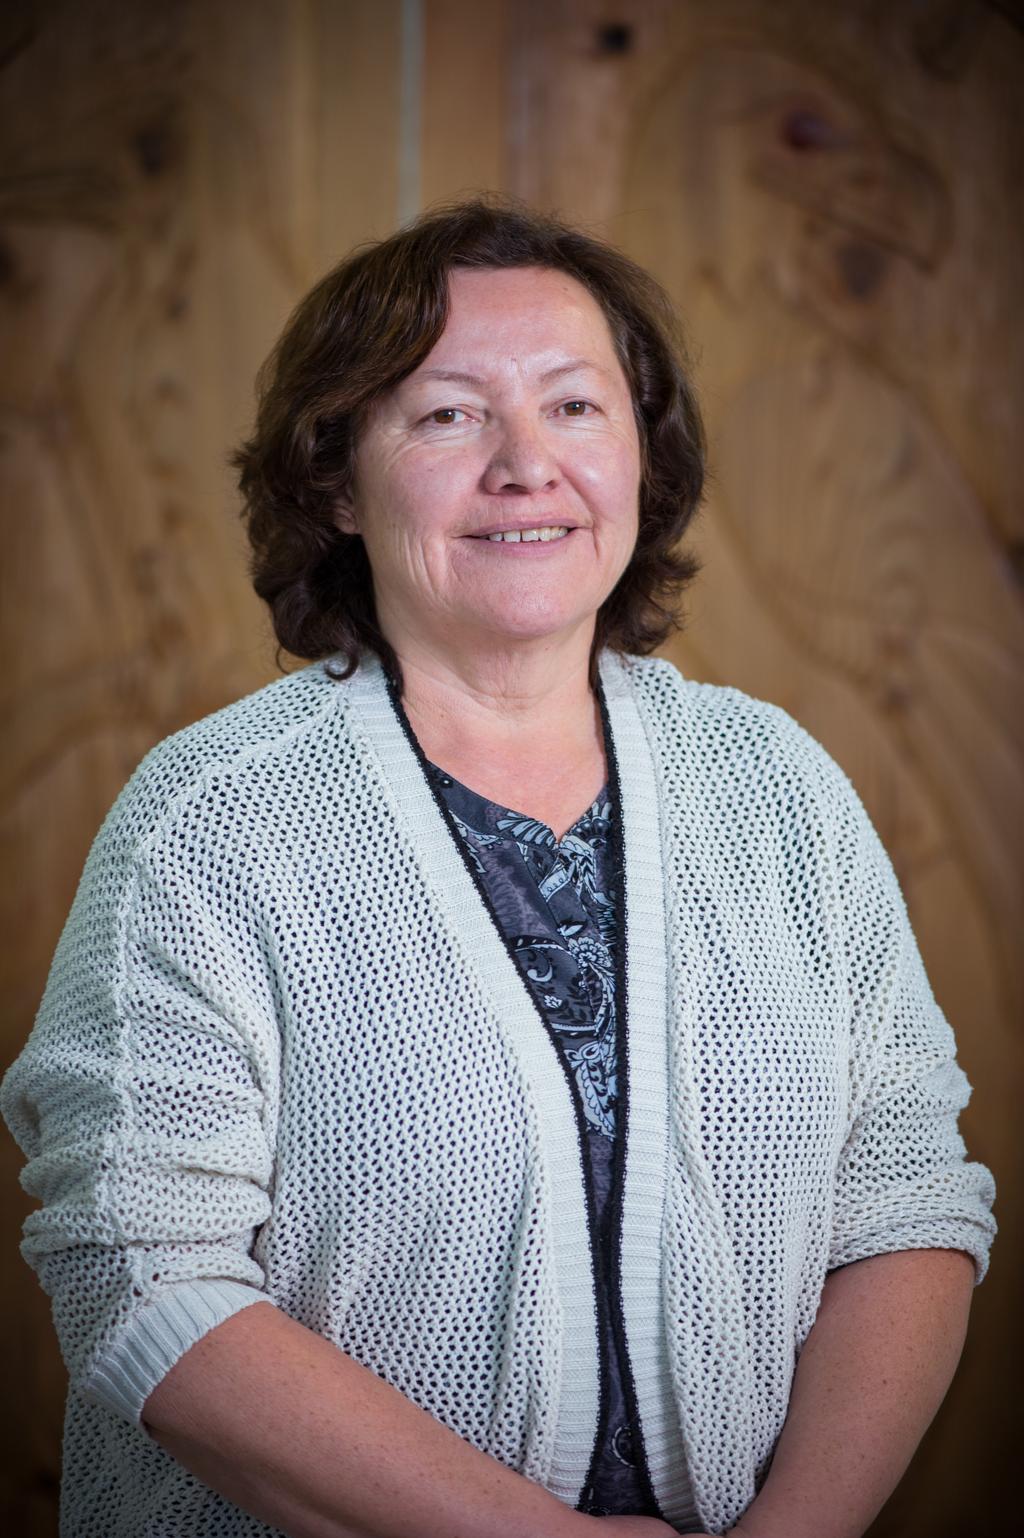 Saskatchewan. She has been with the Indian Teacher Education Program (ITEP) at the University of Saskatchewan since 1998 and is currently the program s Associate Director.